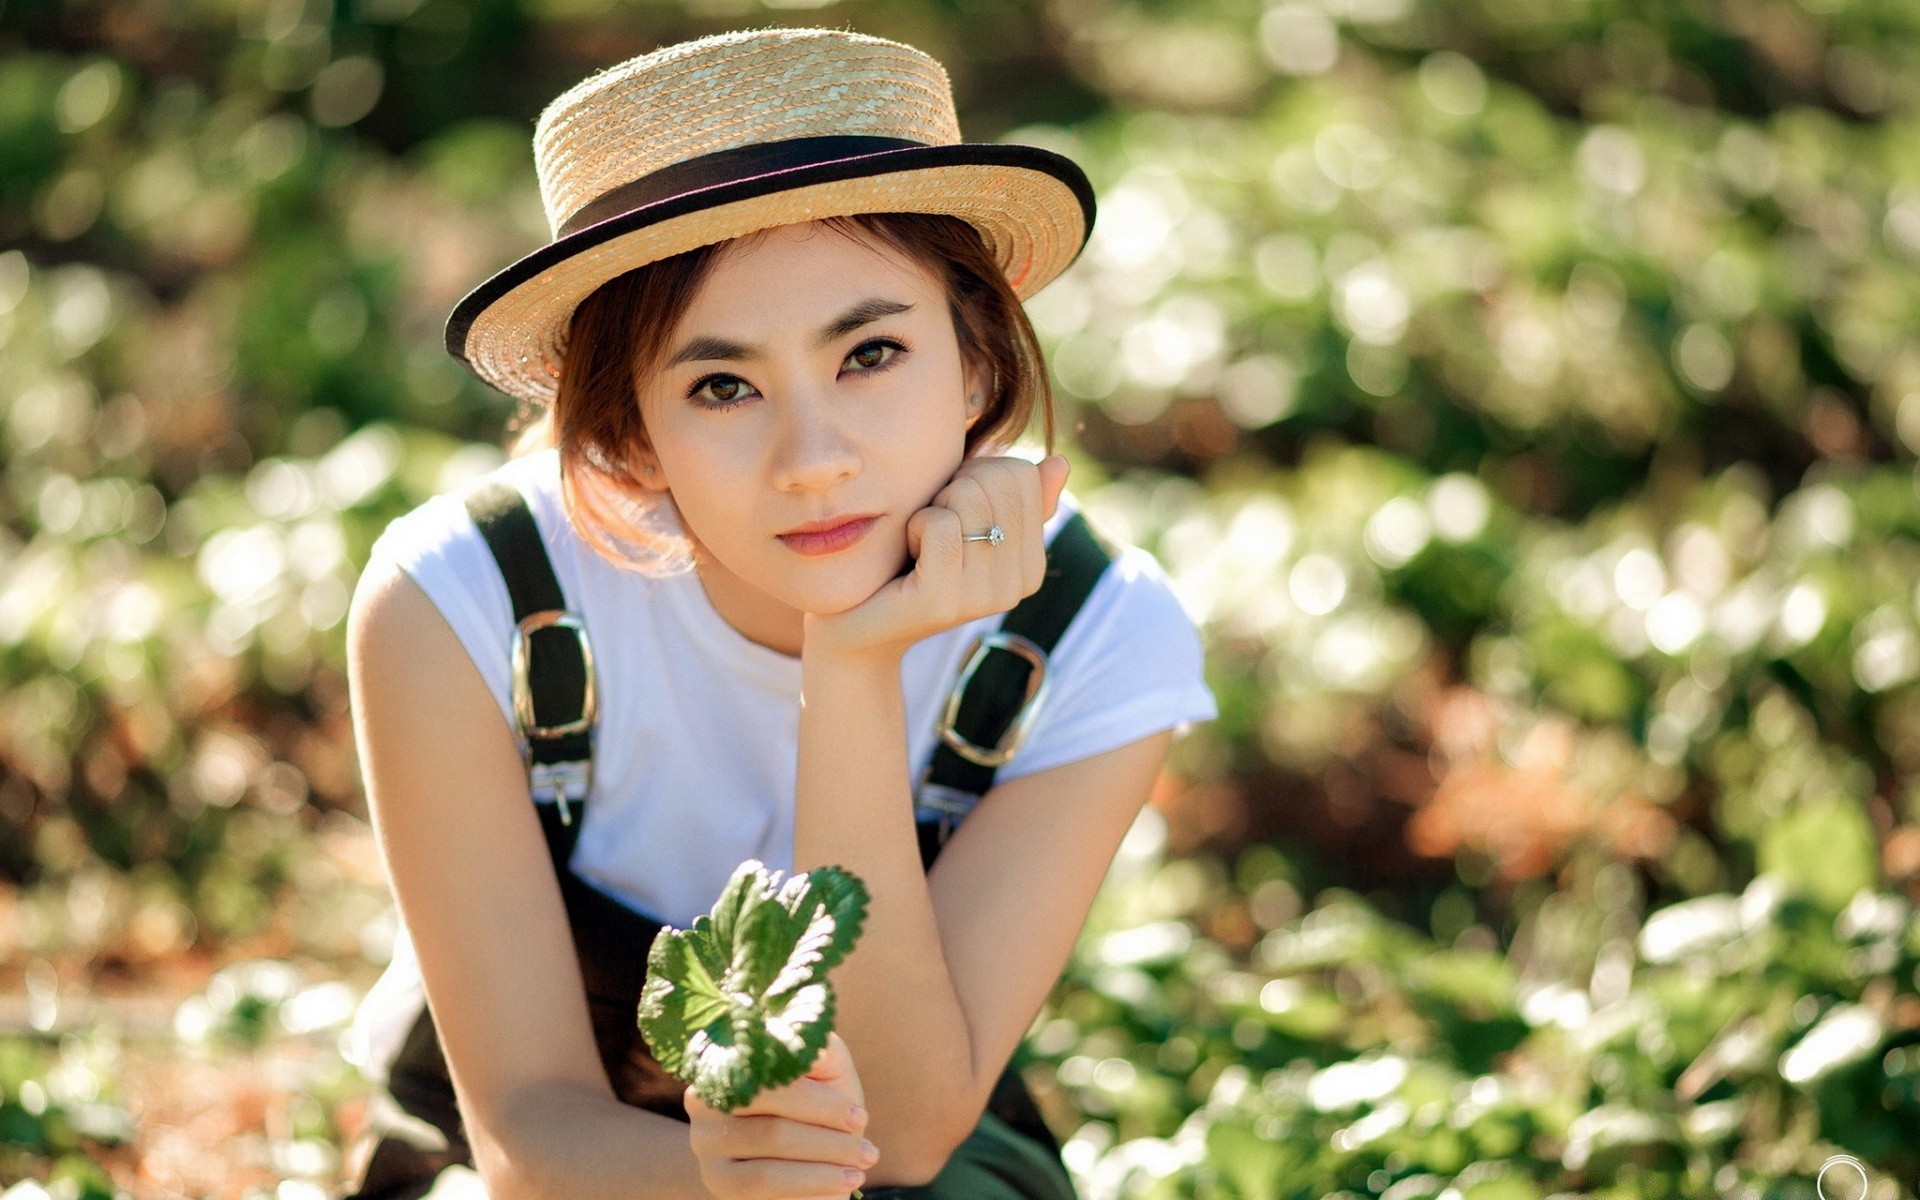 the other girls nature summer woman outdoors leisure cute fair weather girl flower pretty fun relaxation enjoyment child fashion grass one joy